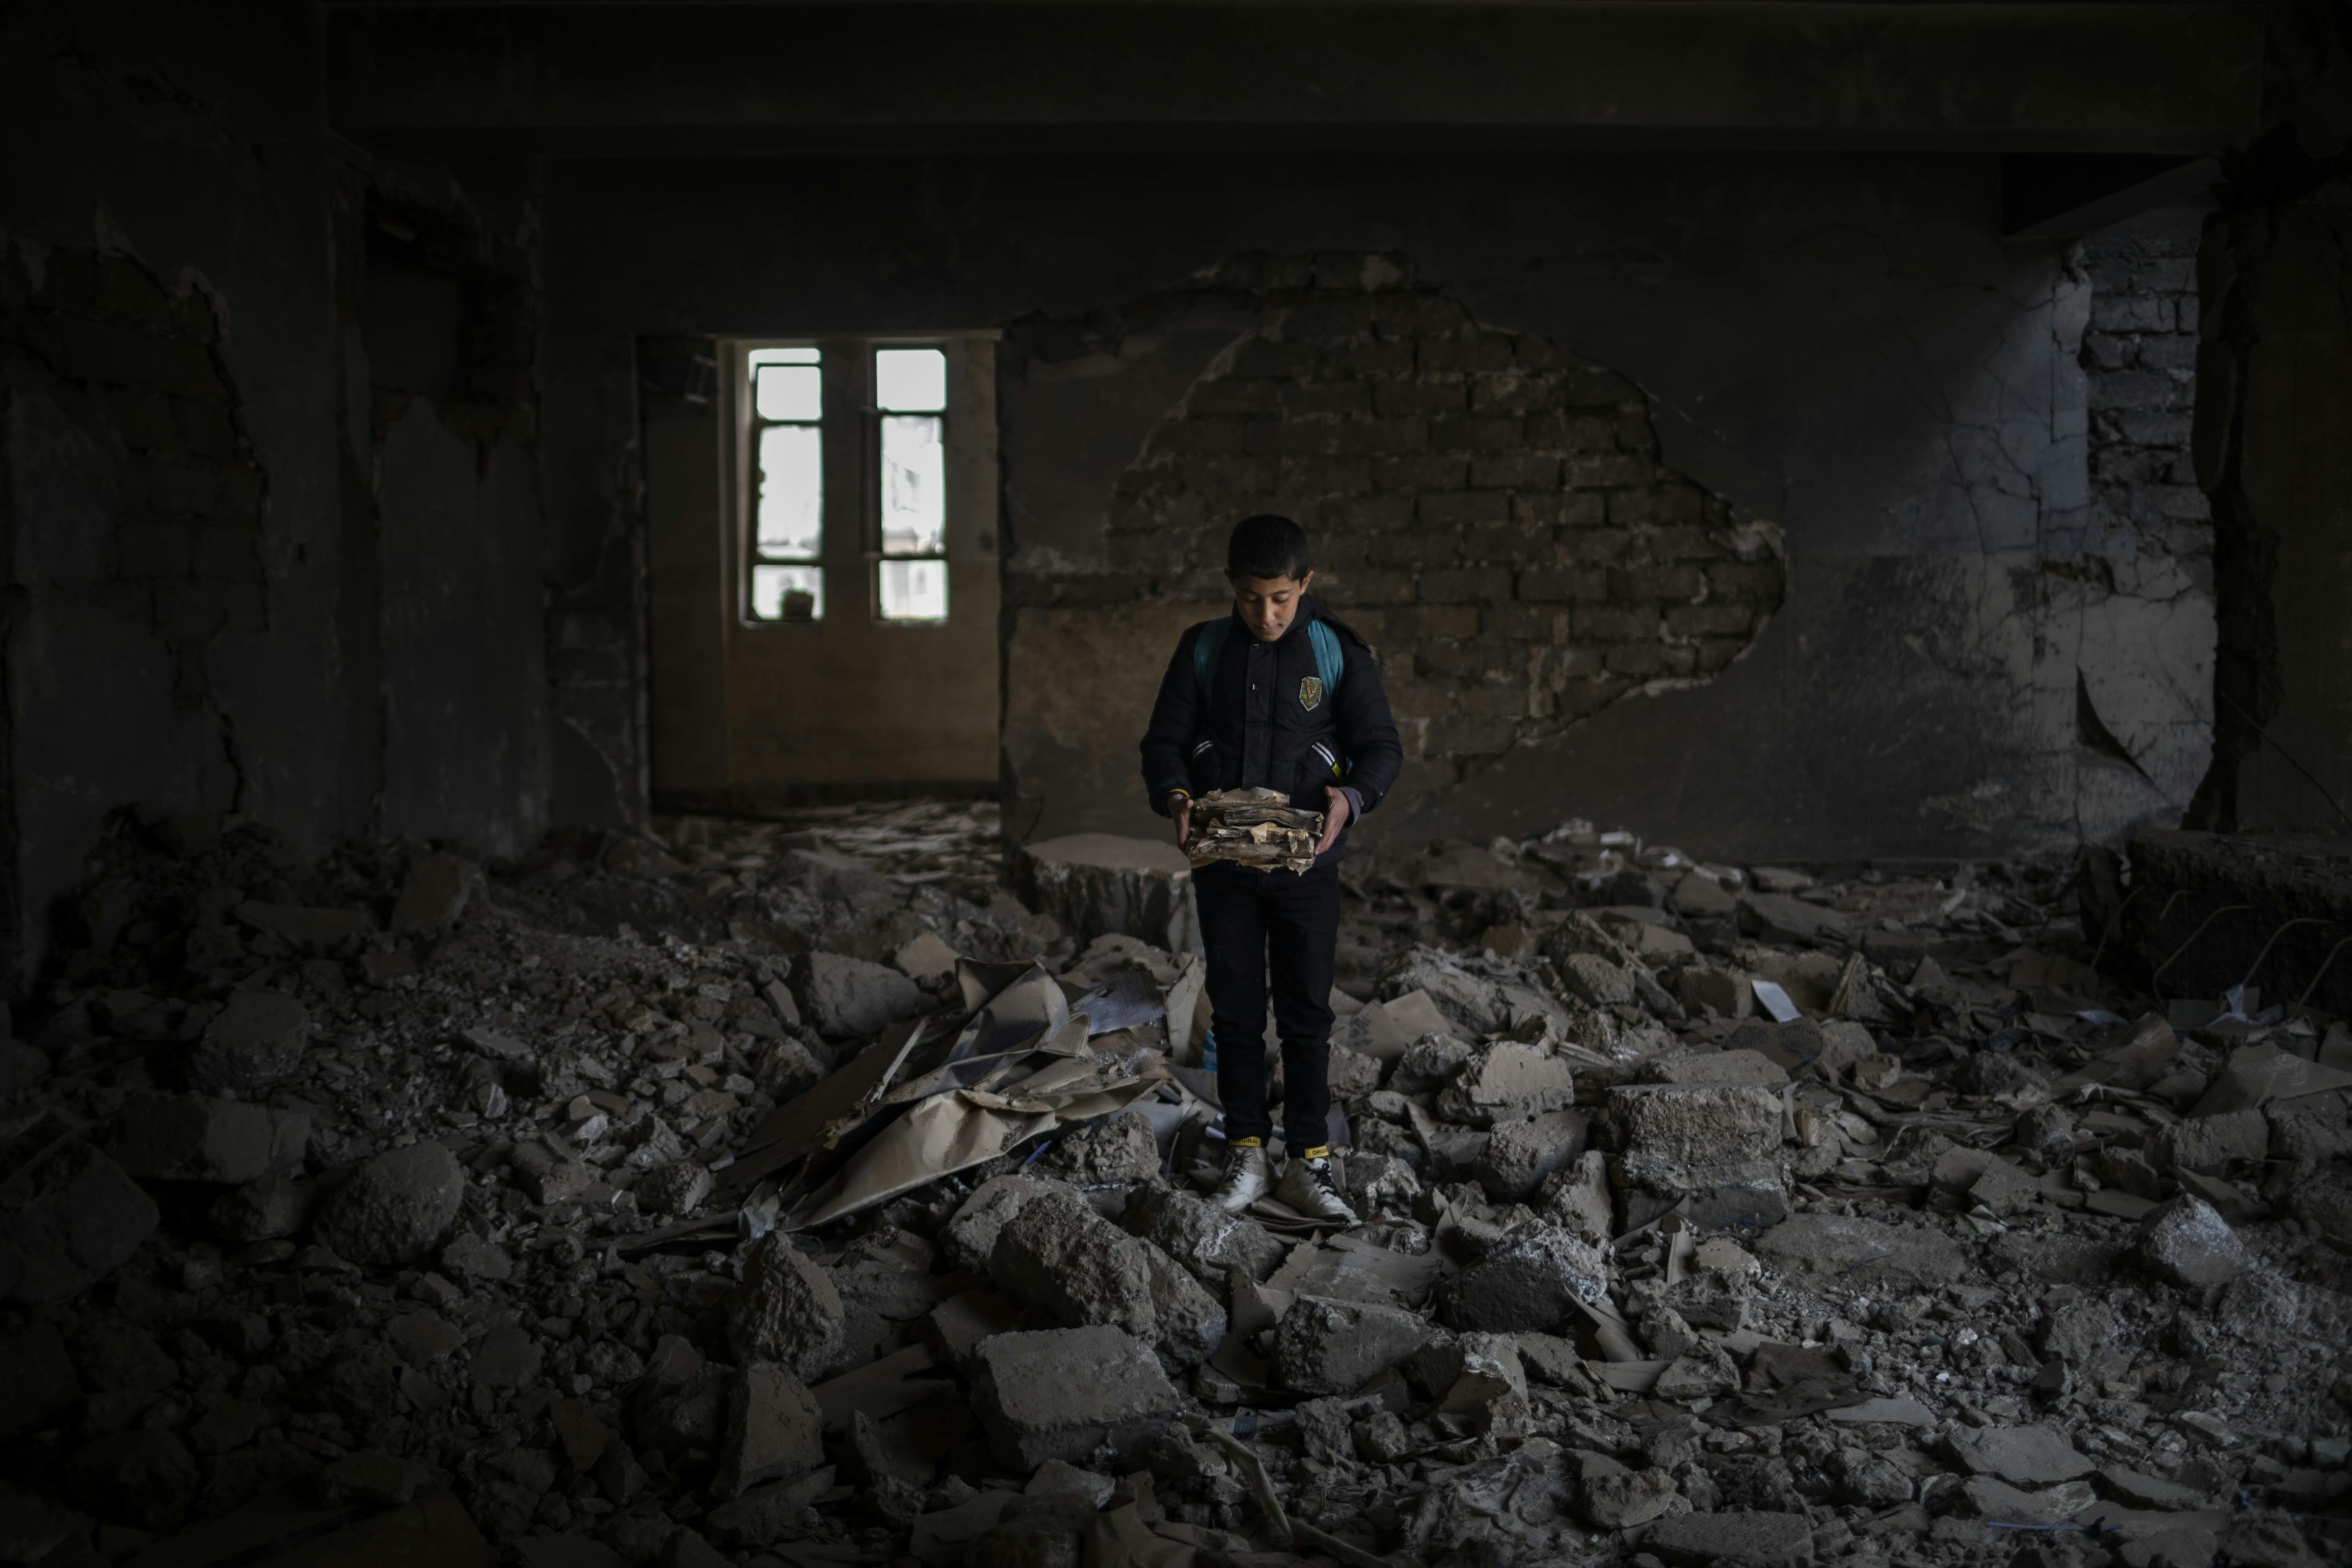  12-year-old Yousef holds destroyed books at Jummuria Secondary School. Yousef dreams of becoming a police officer. The school was severely damaged by shelling during the war in Mosul.
